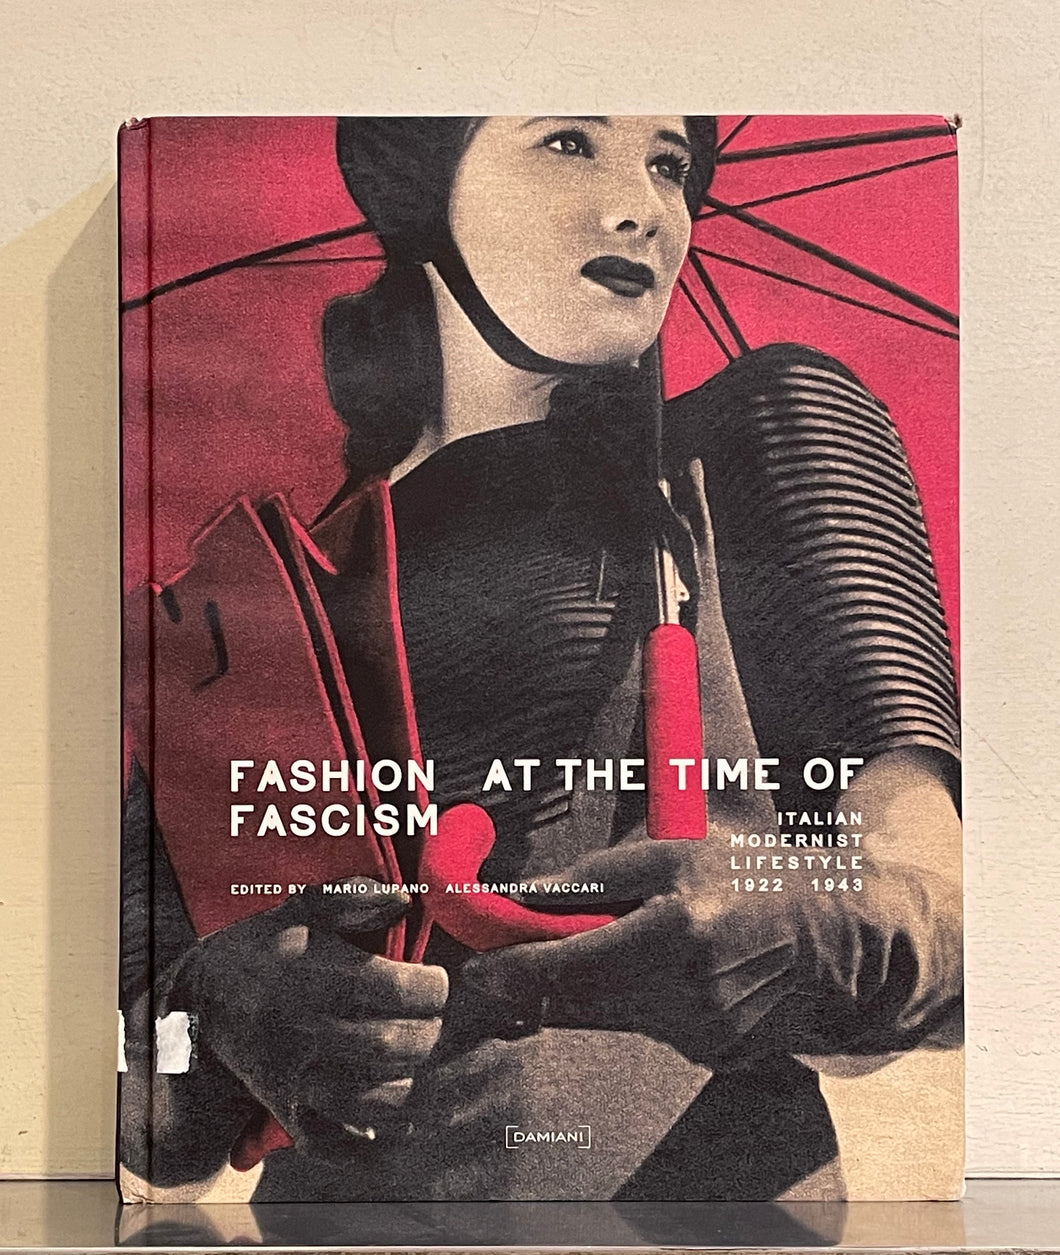 Fashion at the Time of Fascism: Italian Modernist Lifestyle Between 1922 and 1943